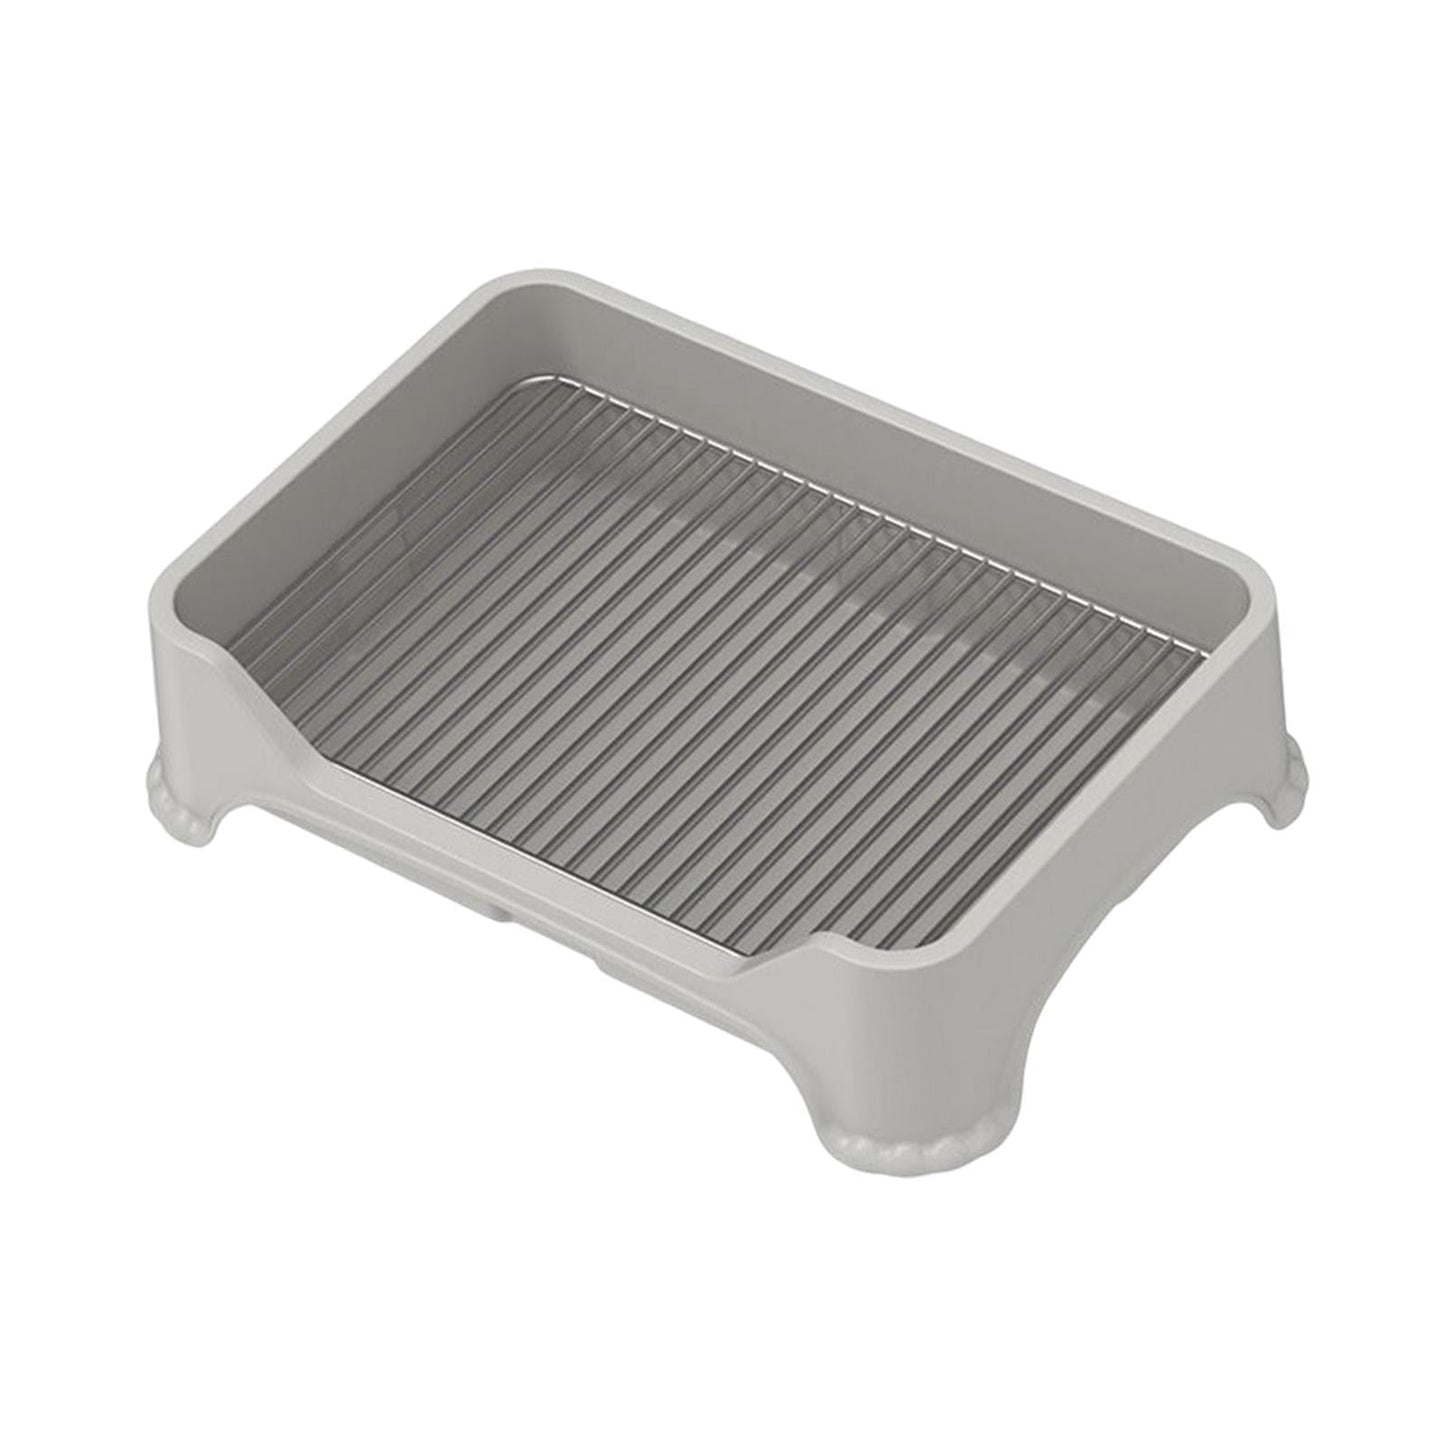 Stainless Steel Mesh Dog Potty Tray